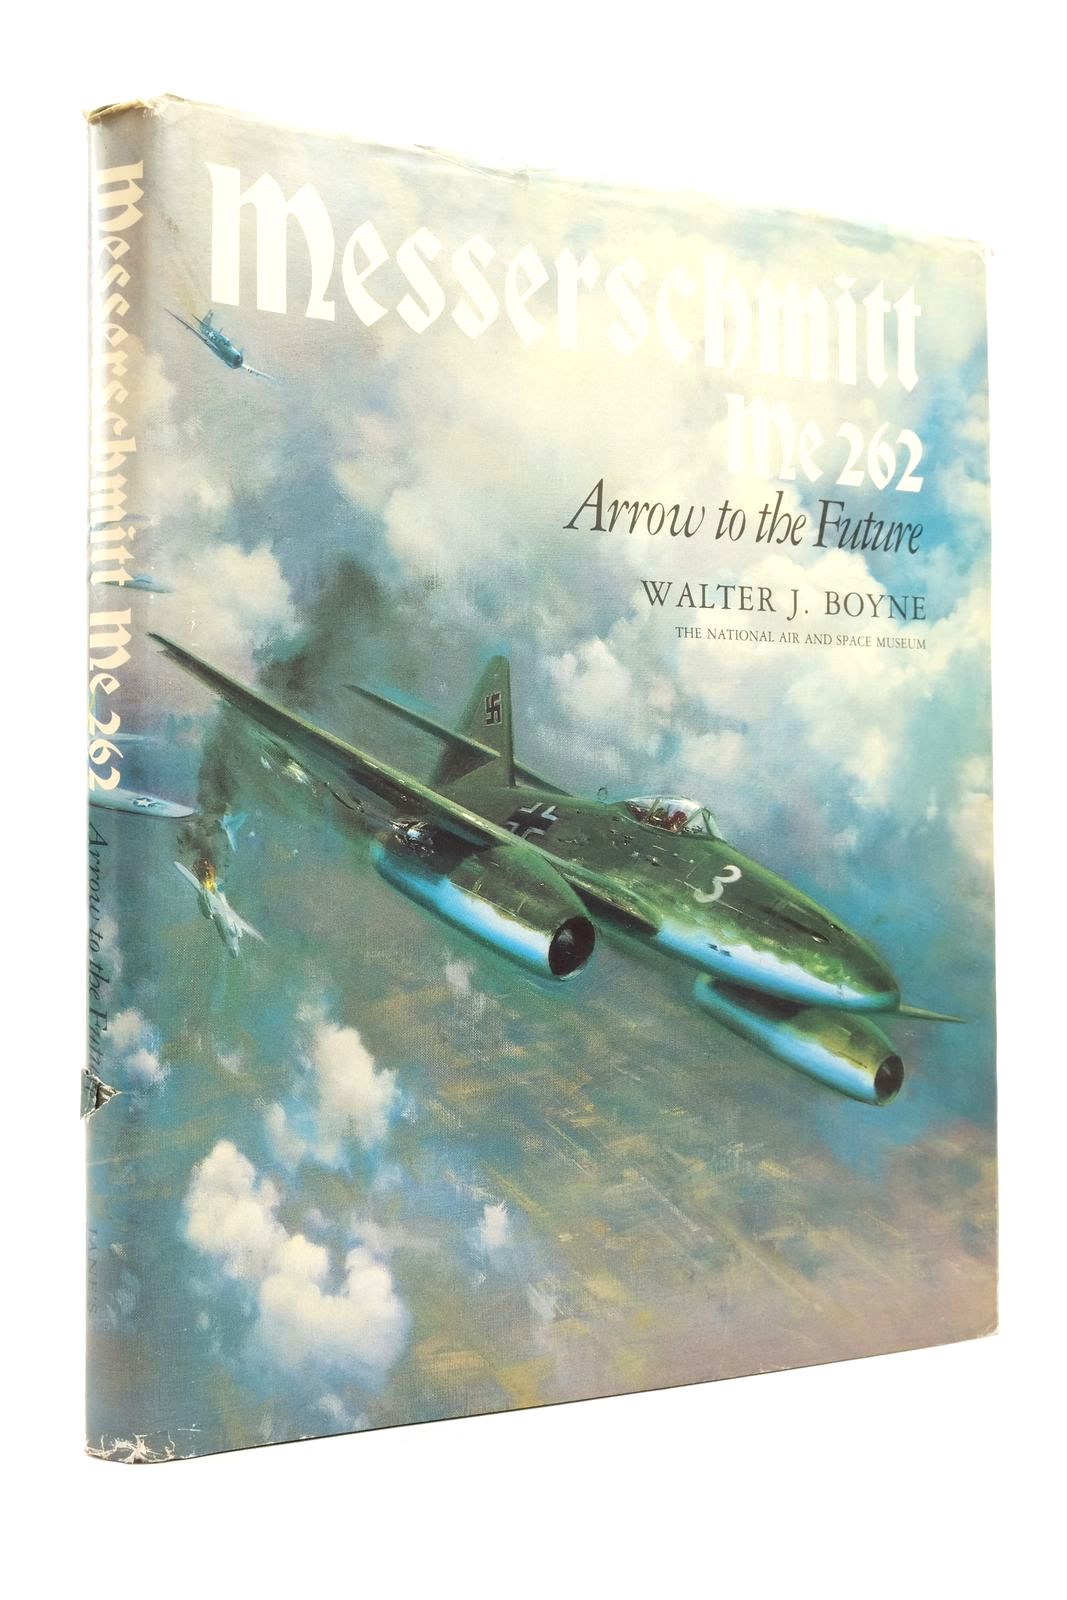 Photo of MESSERSCHMITT ME 262 ARROW TO THE FUTURE written by Boyne, Walter J. published by Jane's Publishing Company (STOCK CODE: 2138584)  for sale by Stella & Rose's Books